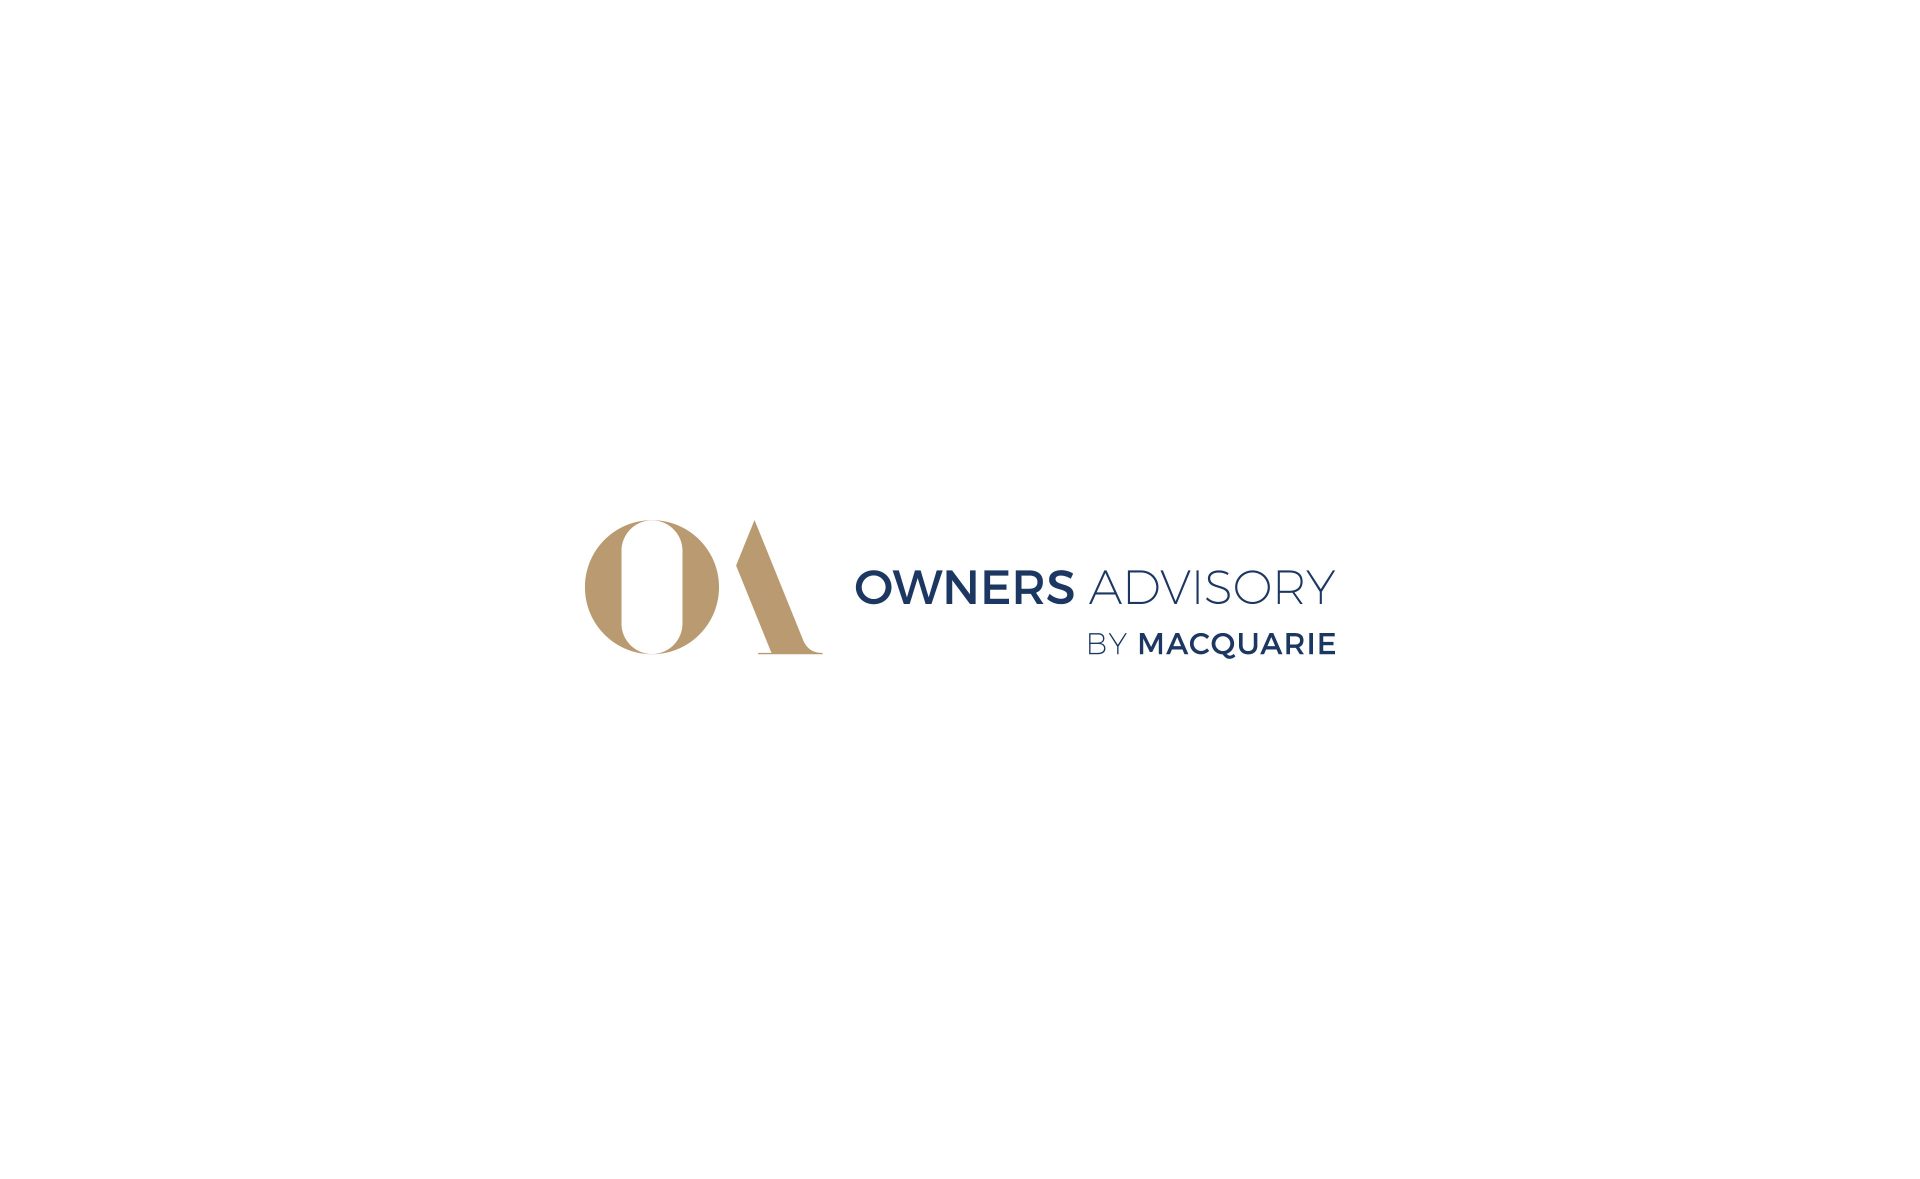 Owners Advisory by Macquarie